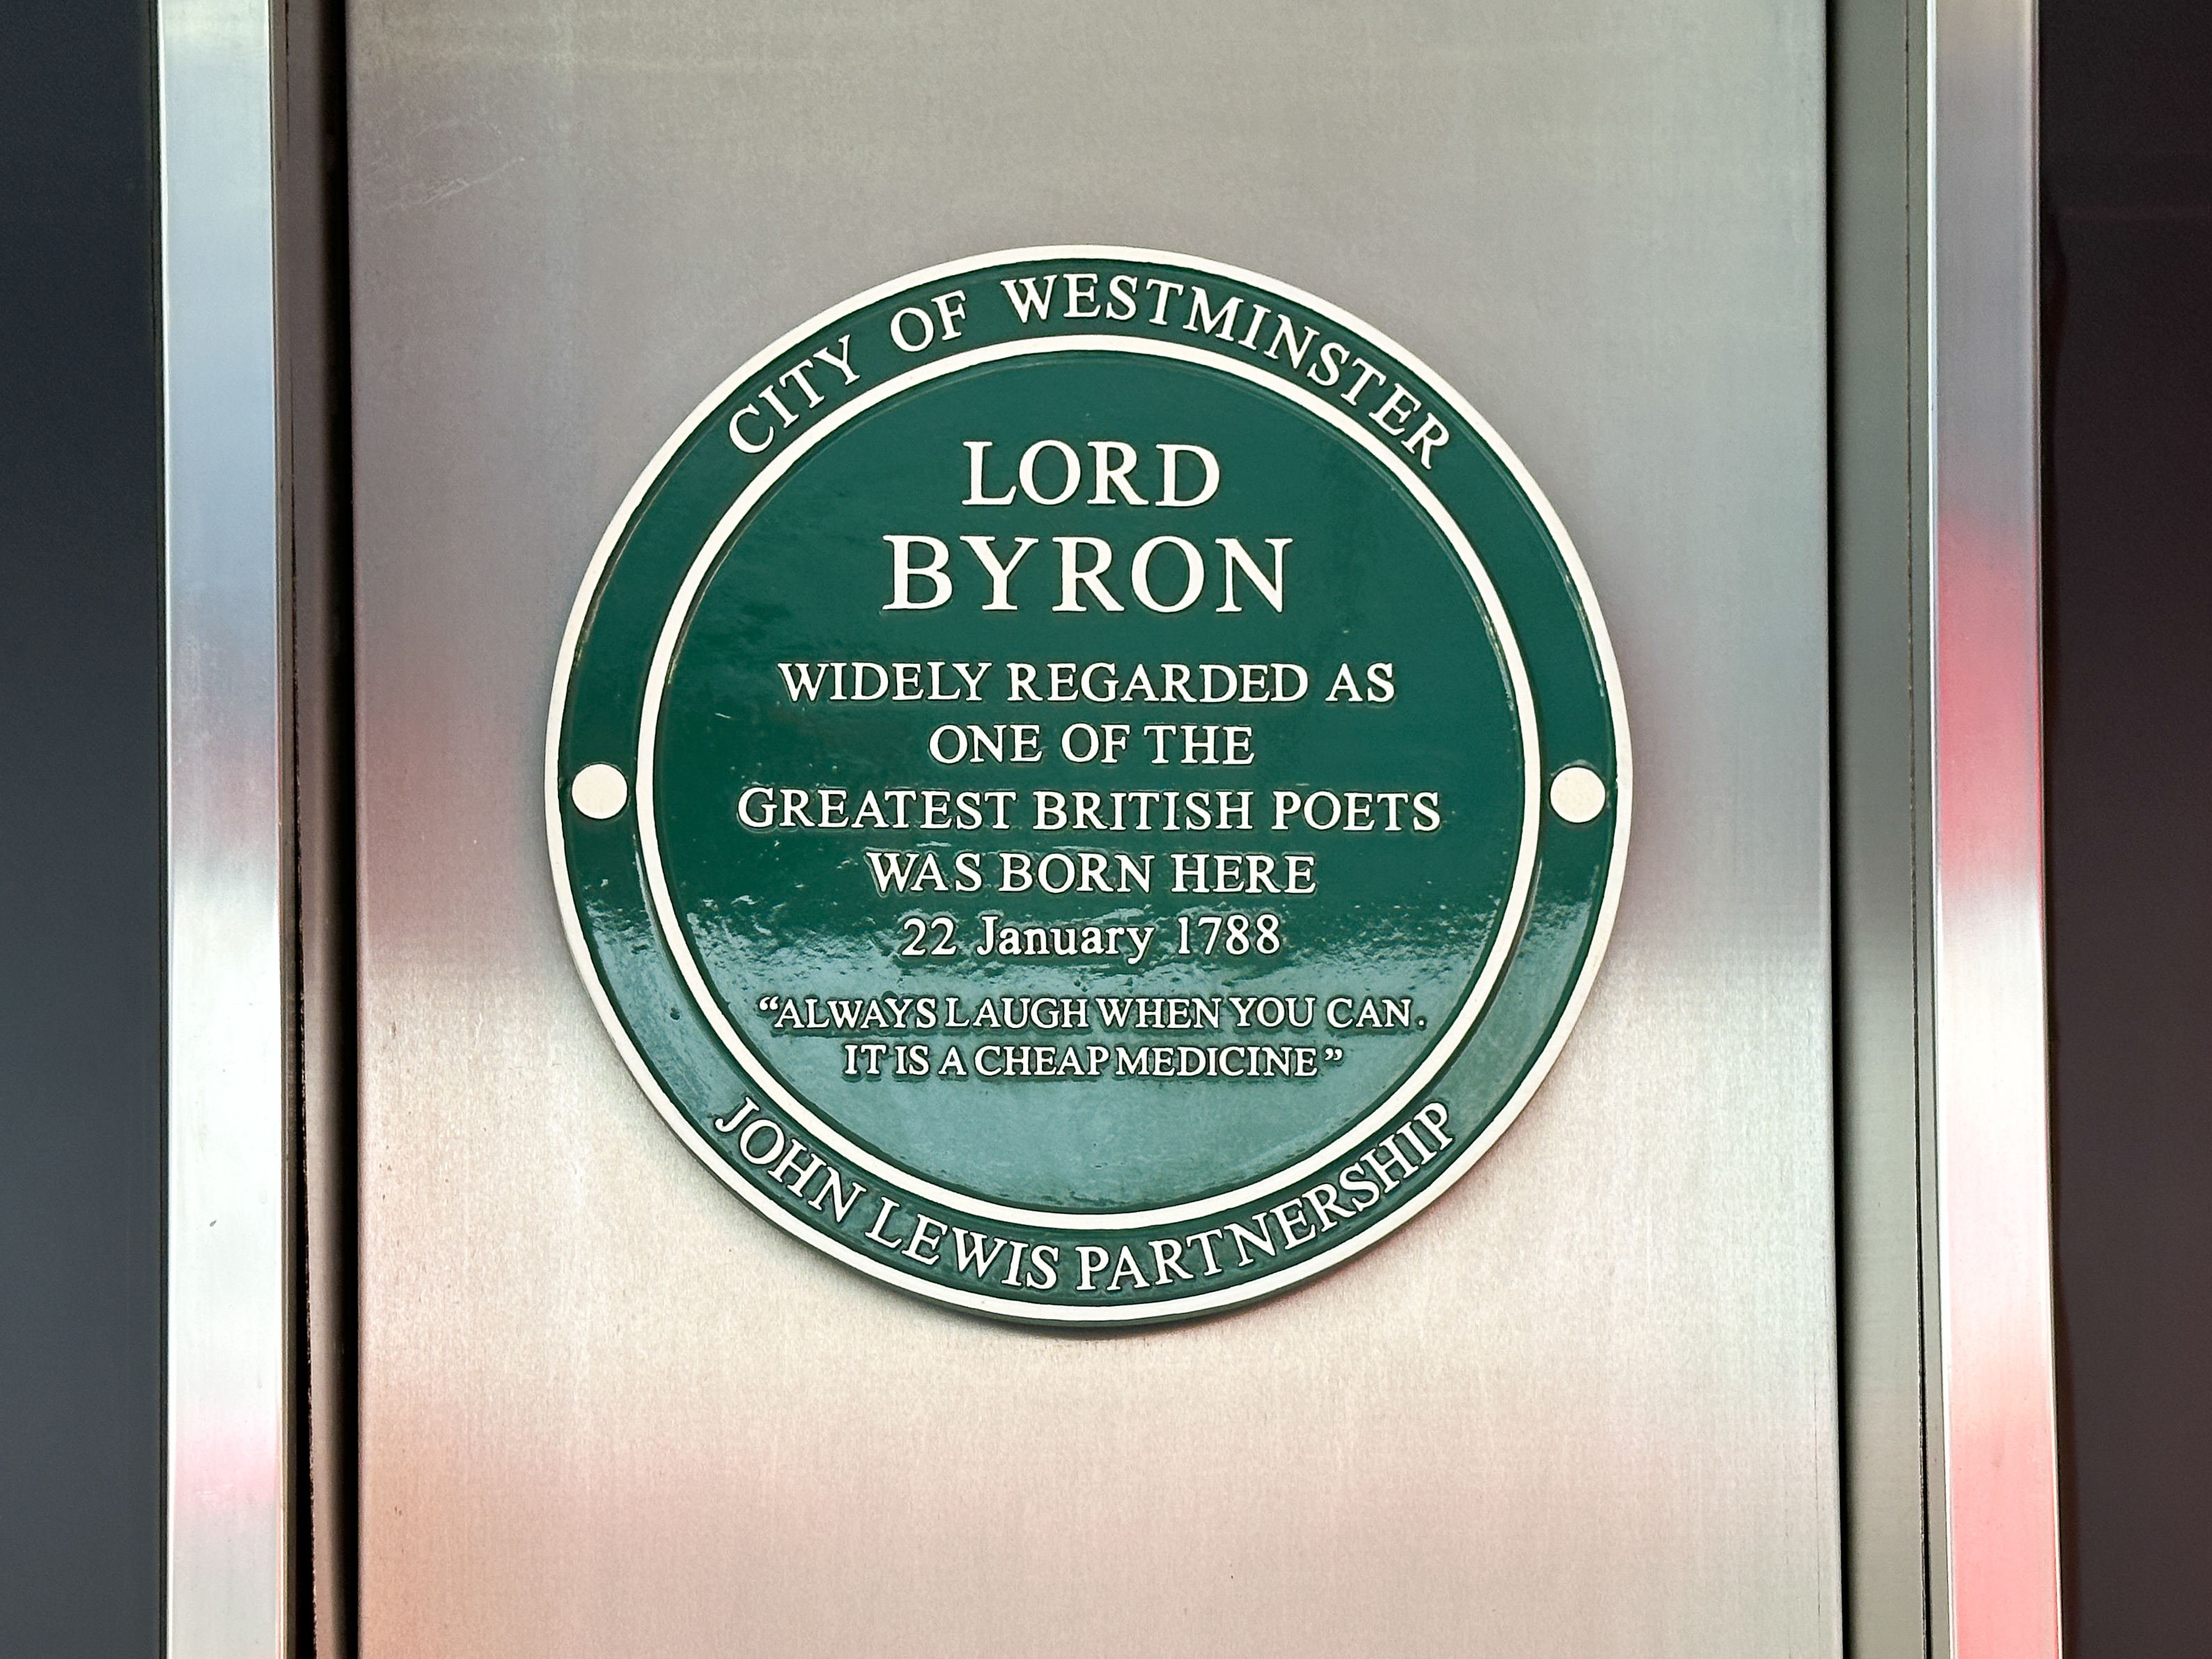 Lord Byron’s Birthplace Plaque: Honors Lord Byron’s birth in Westminster, featuring an inspirational quote.